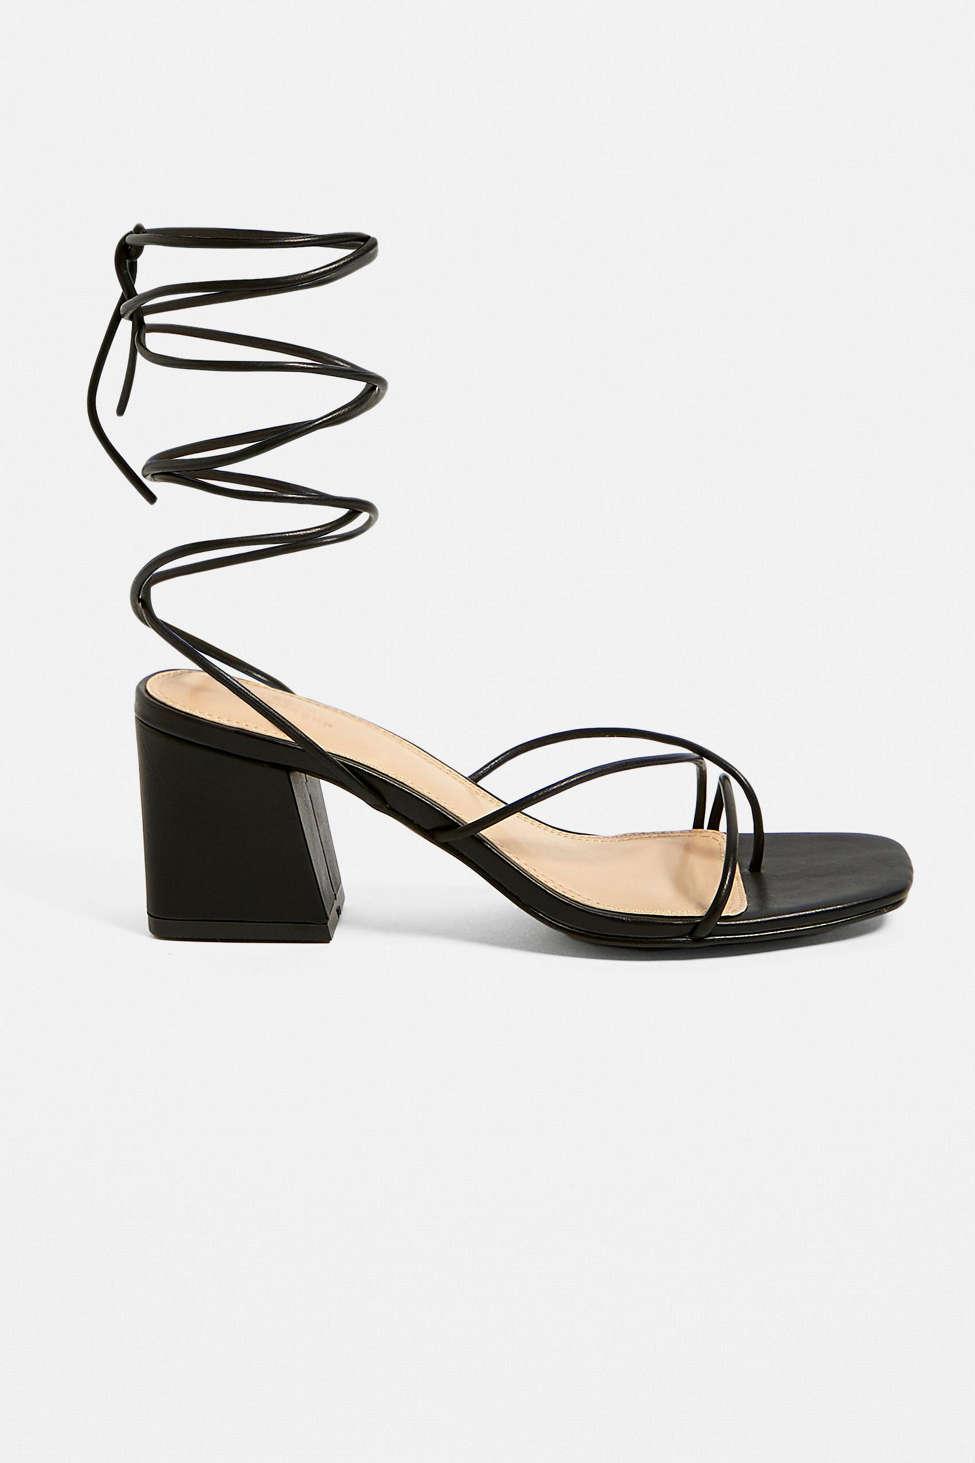 urban outfitters strappy sandals